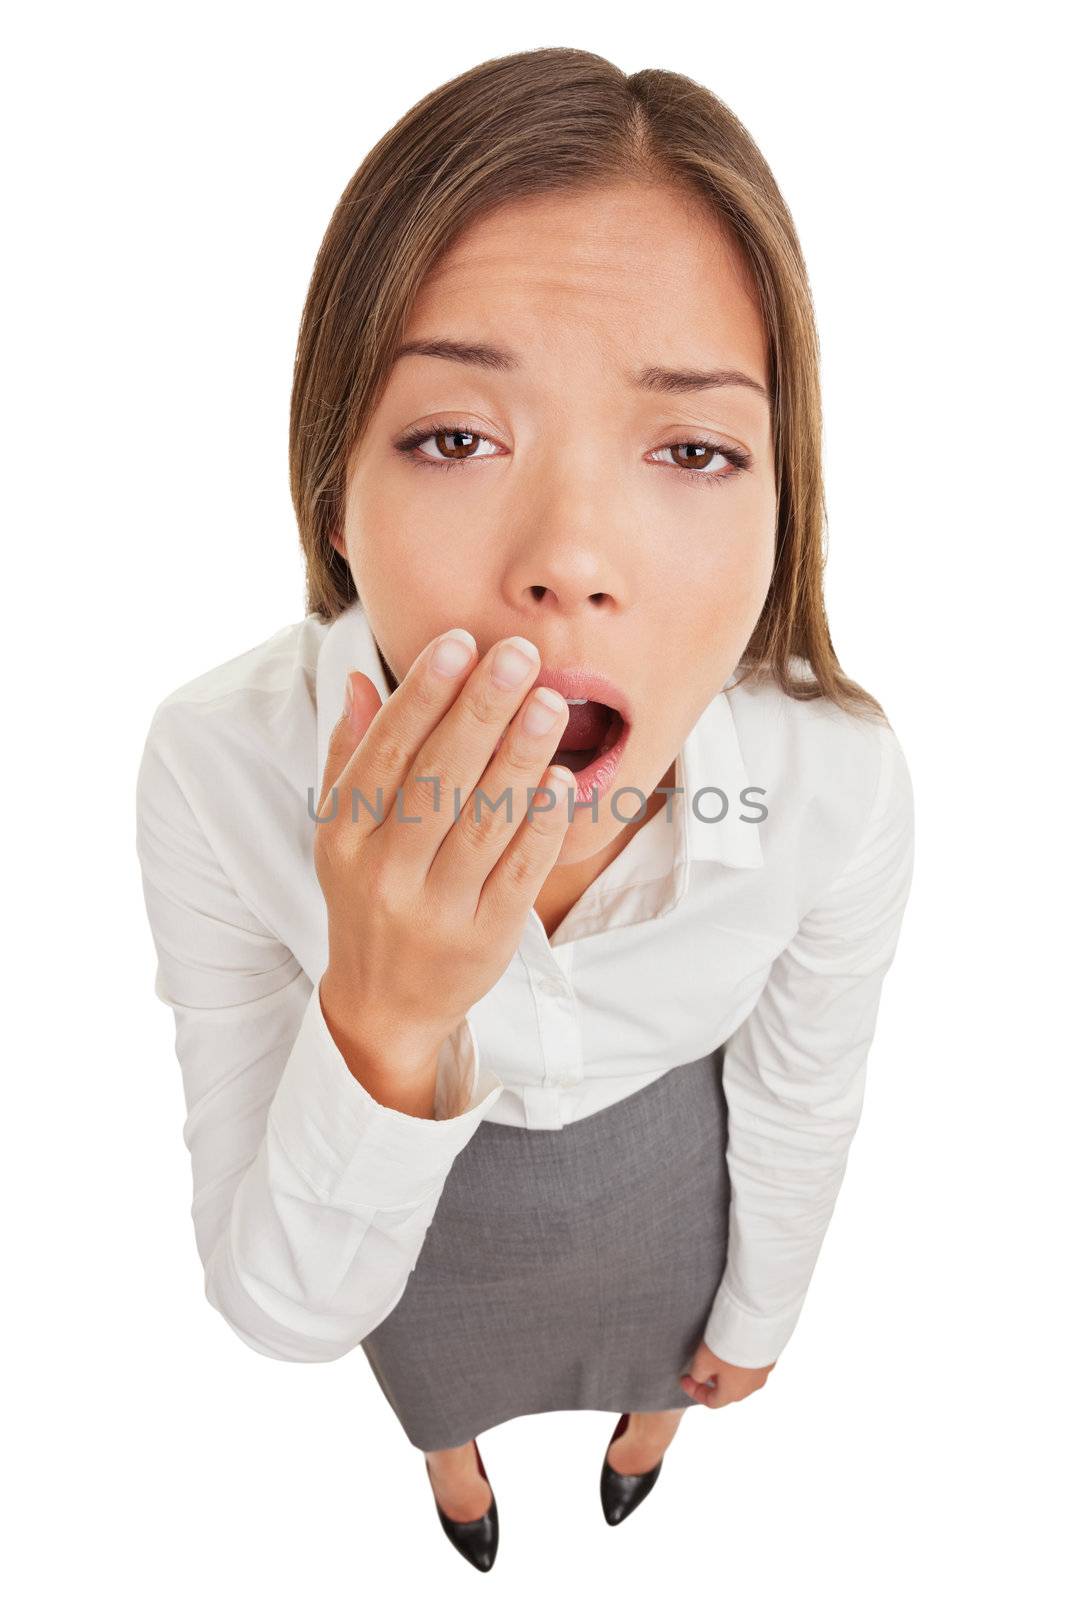 Exhausted or bored woman in yawn. Humorous high angle view of an exhausted or bored young woman yawning with her hand to her mouth and apathetic eyes, isolated on white background.